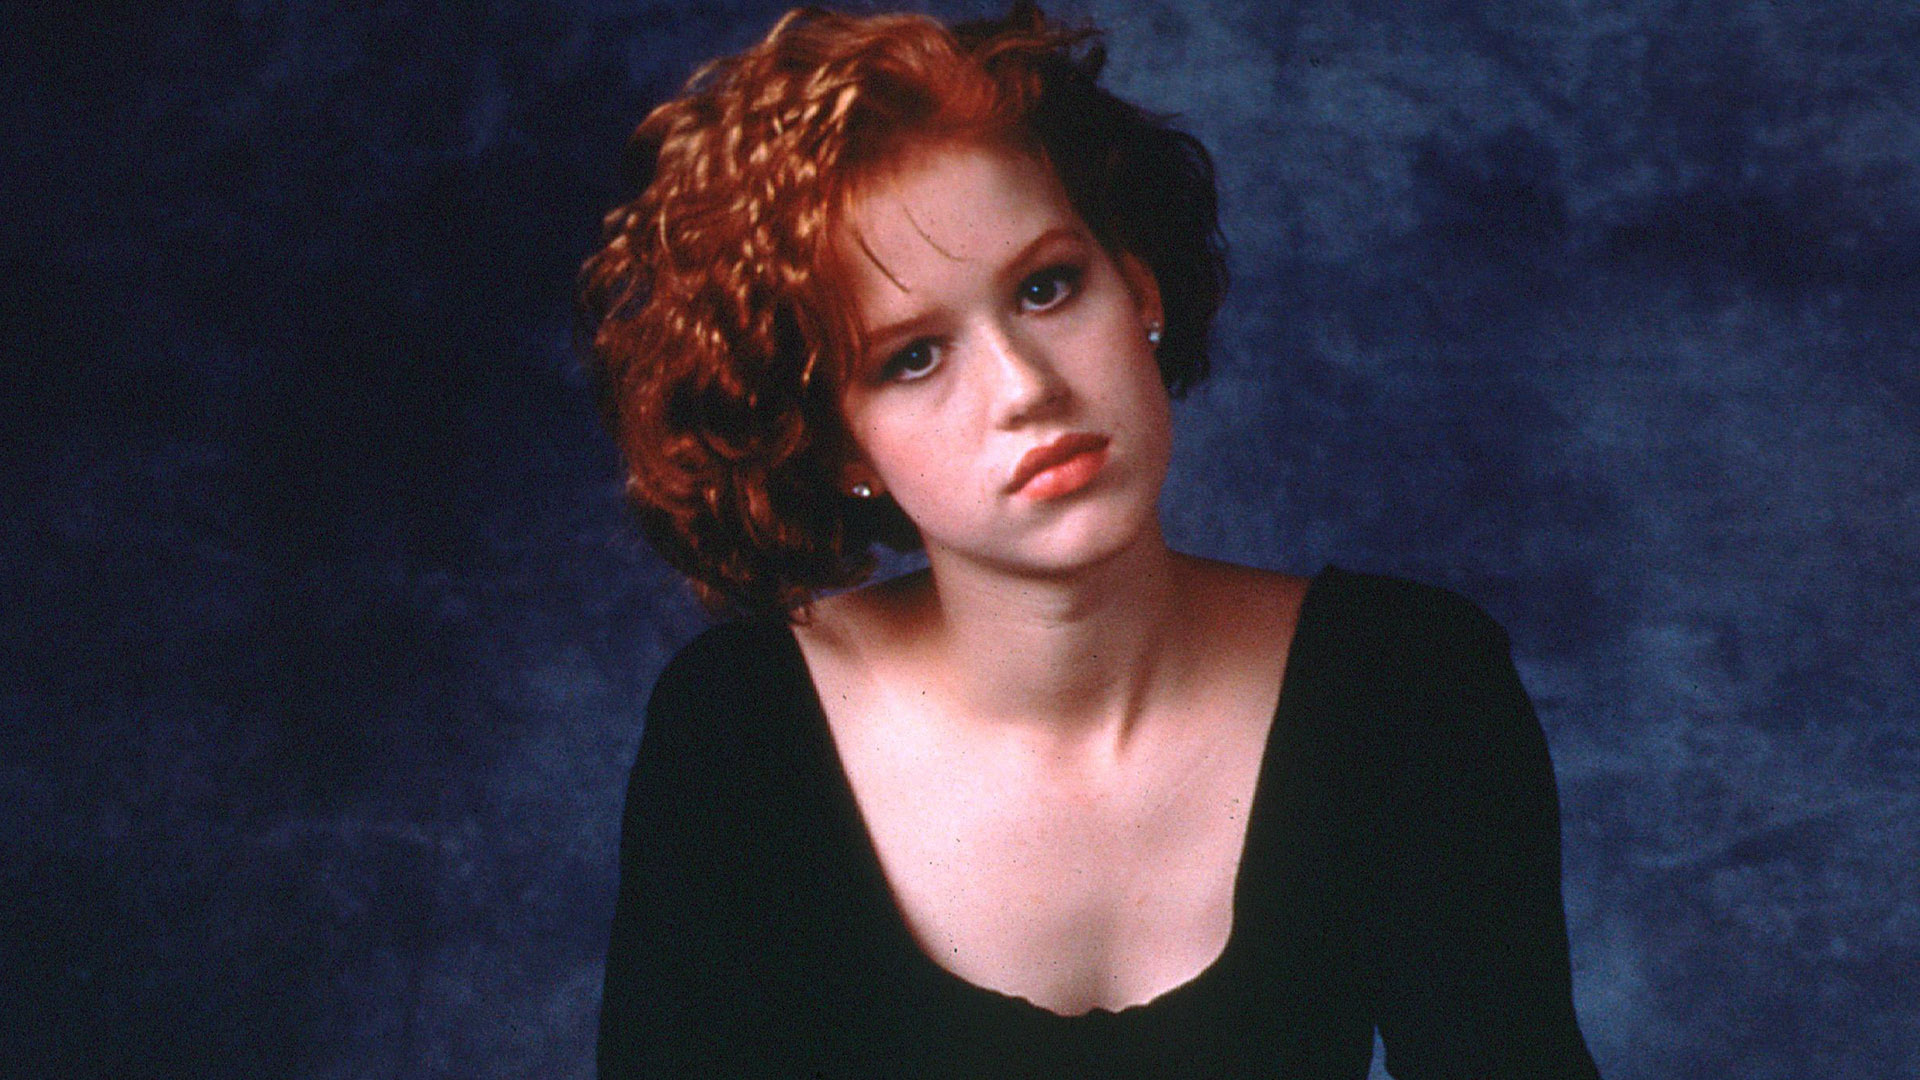 This 1985 $51-Million Classic Would Be Canceled Now, Says Molly Ringwald